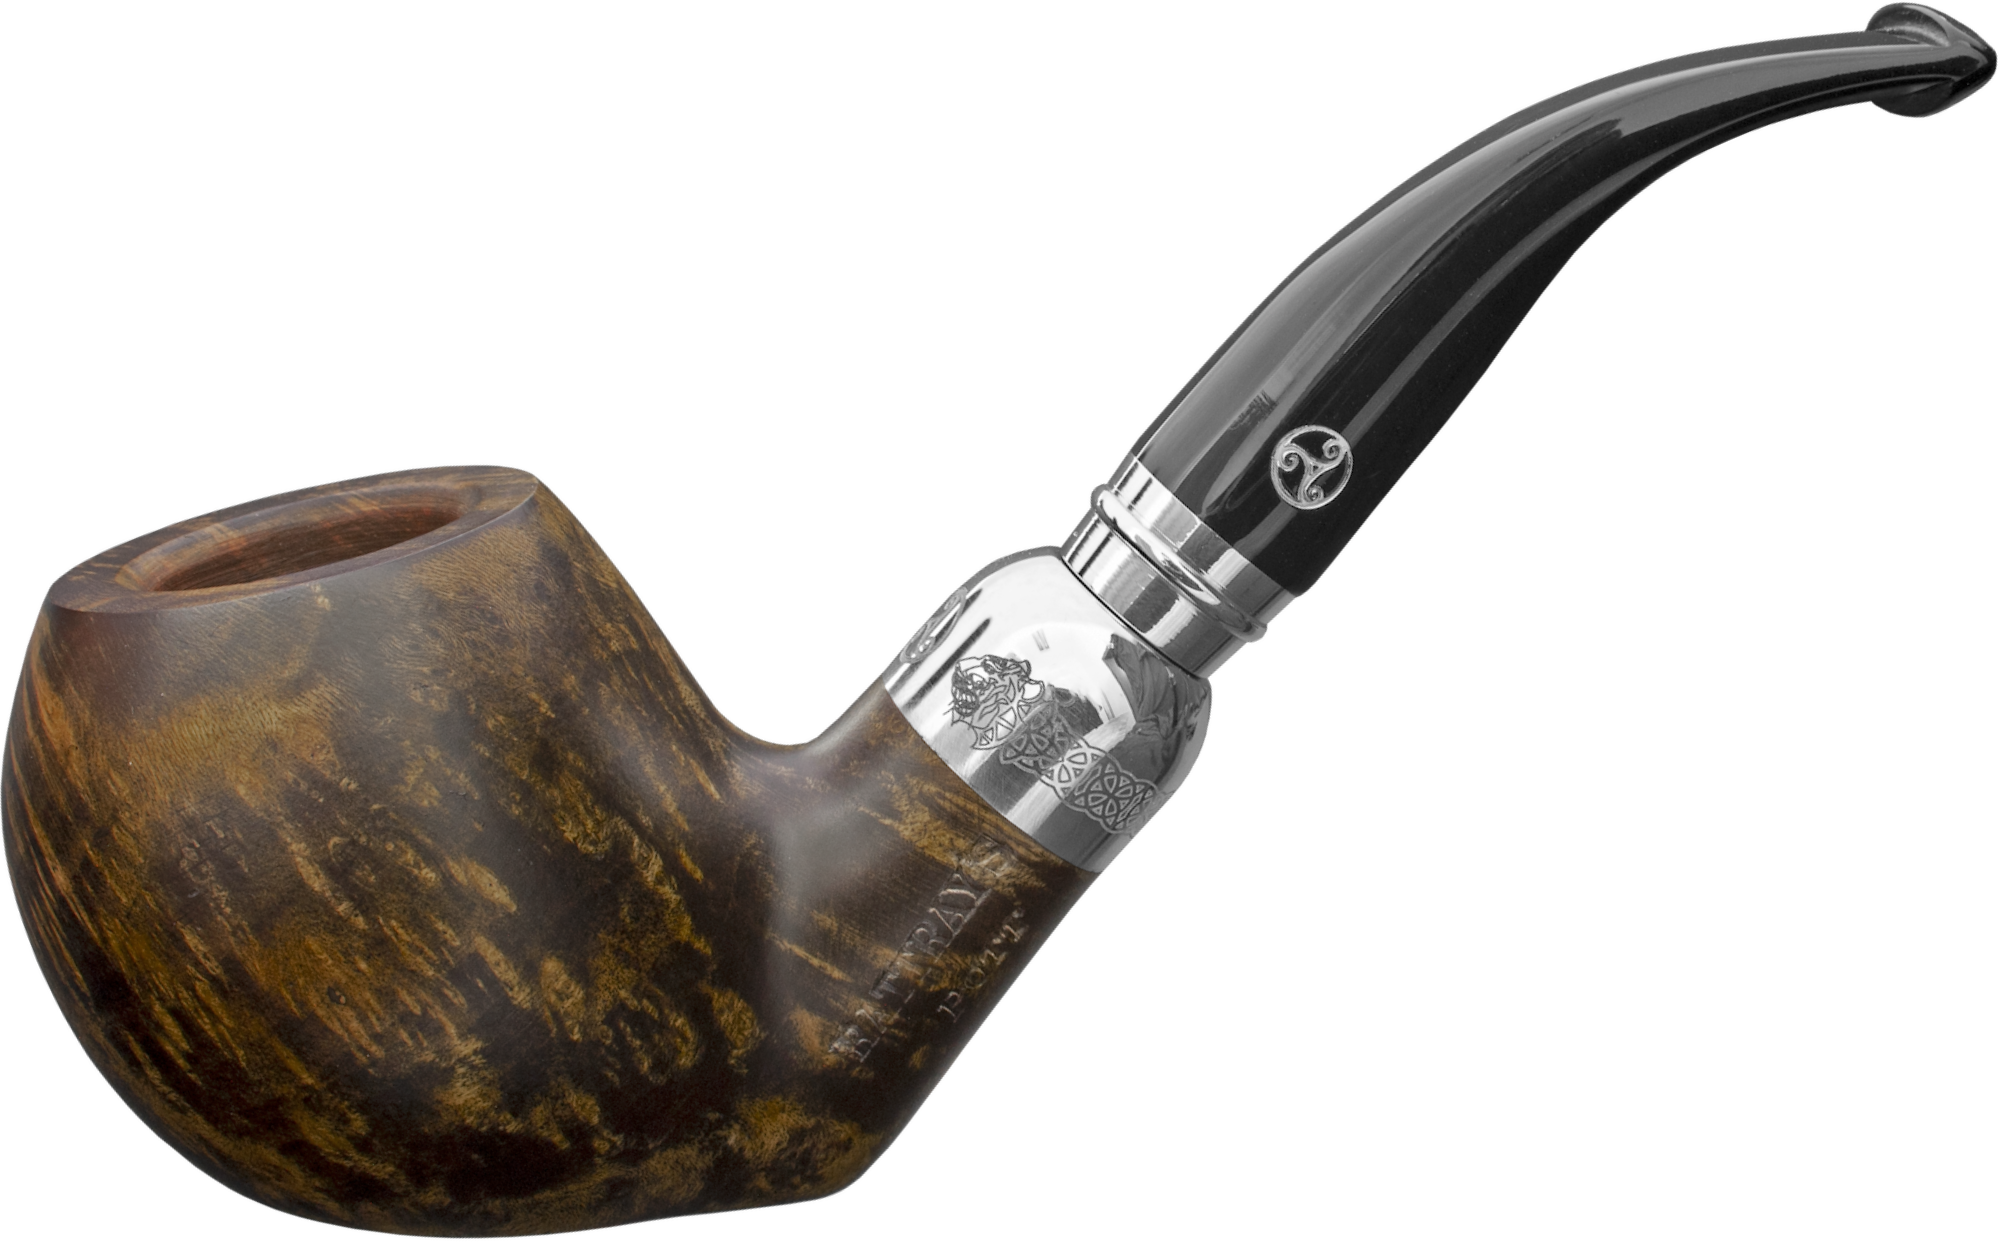 Rattray's Pipe of the Year 2022 Contrast